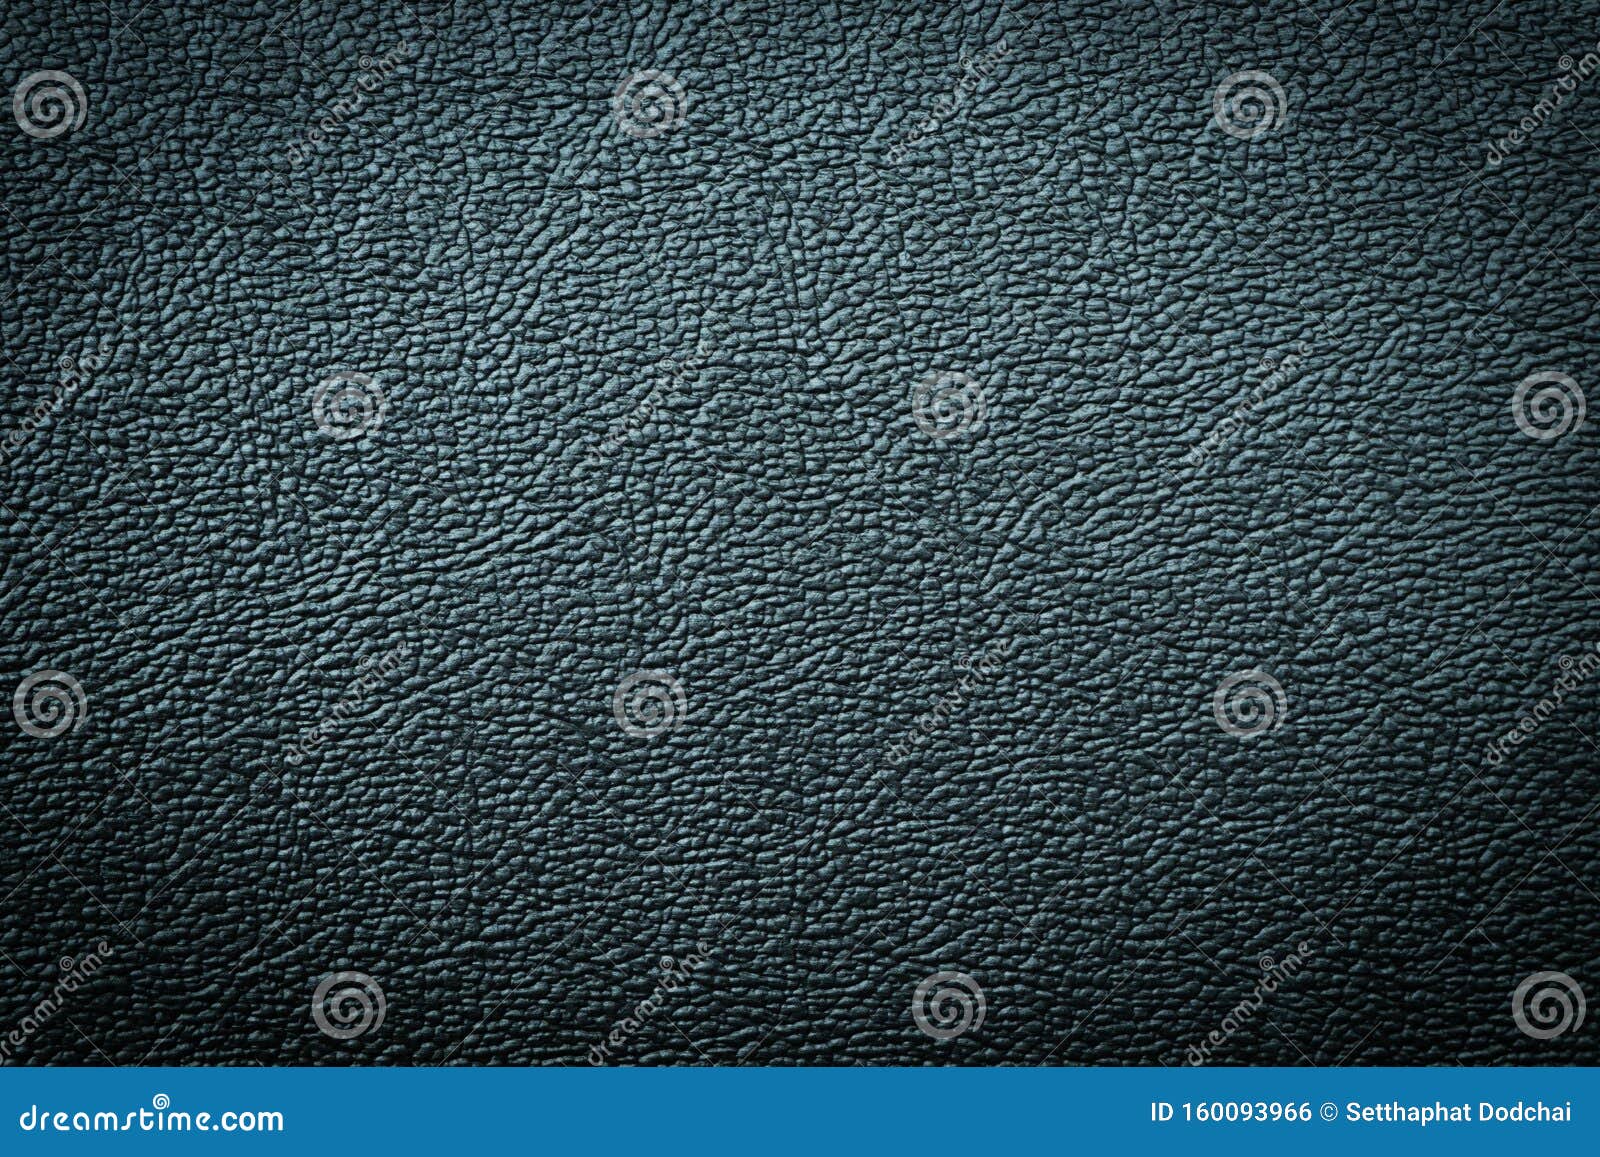 close-up of black gray plastic material seamless texture. surface of rough abstract dark black matte background.